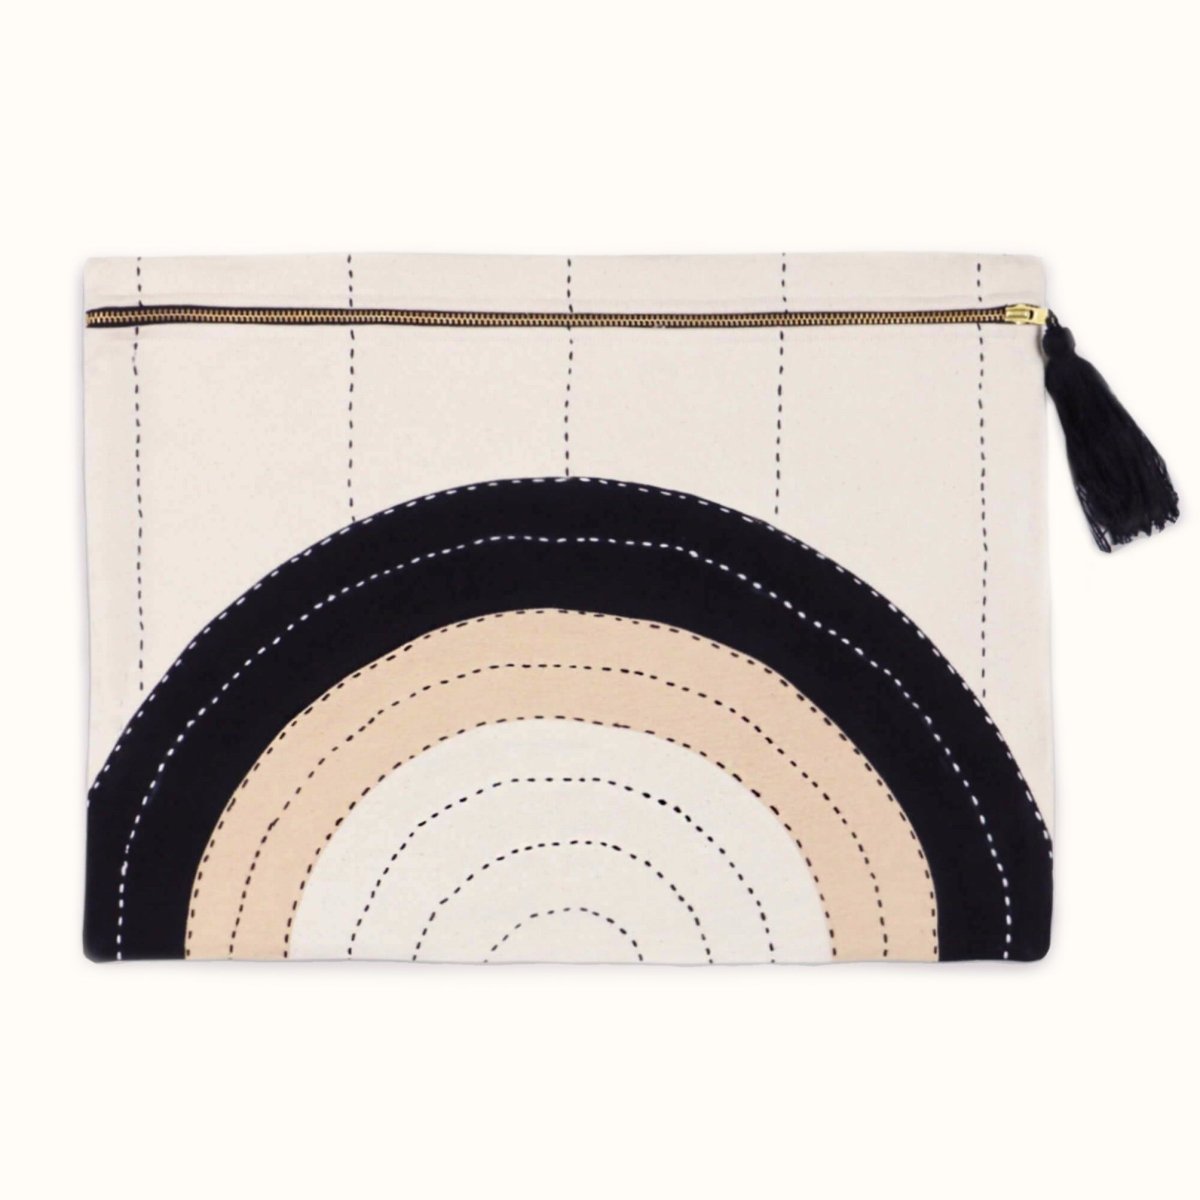 Oversized square pouch with a cross-stitched concentric pattern in neutral colors. Includes zipper with a black tassel. Designed by Anchal in Louisville, Kentucky and handmade in Ajmer, India.